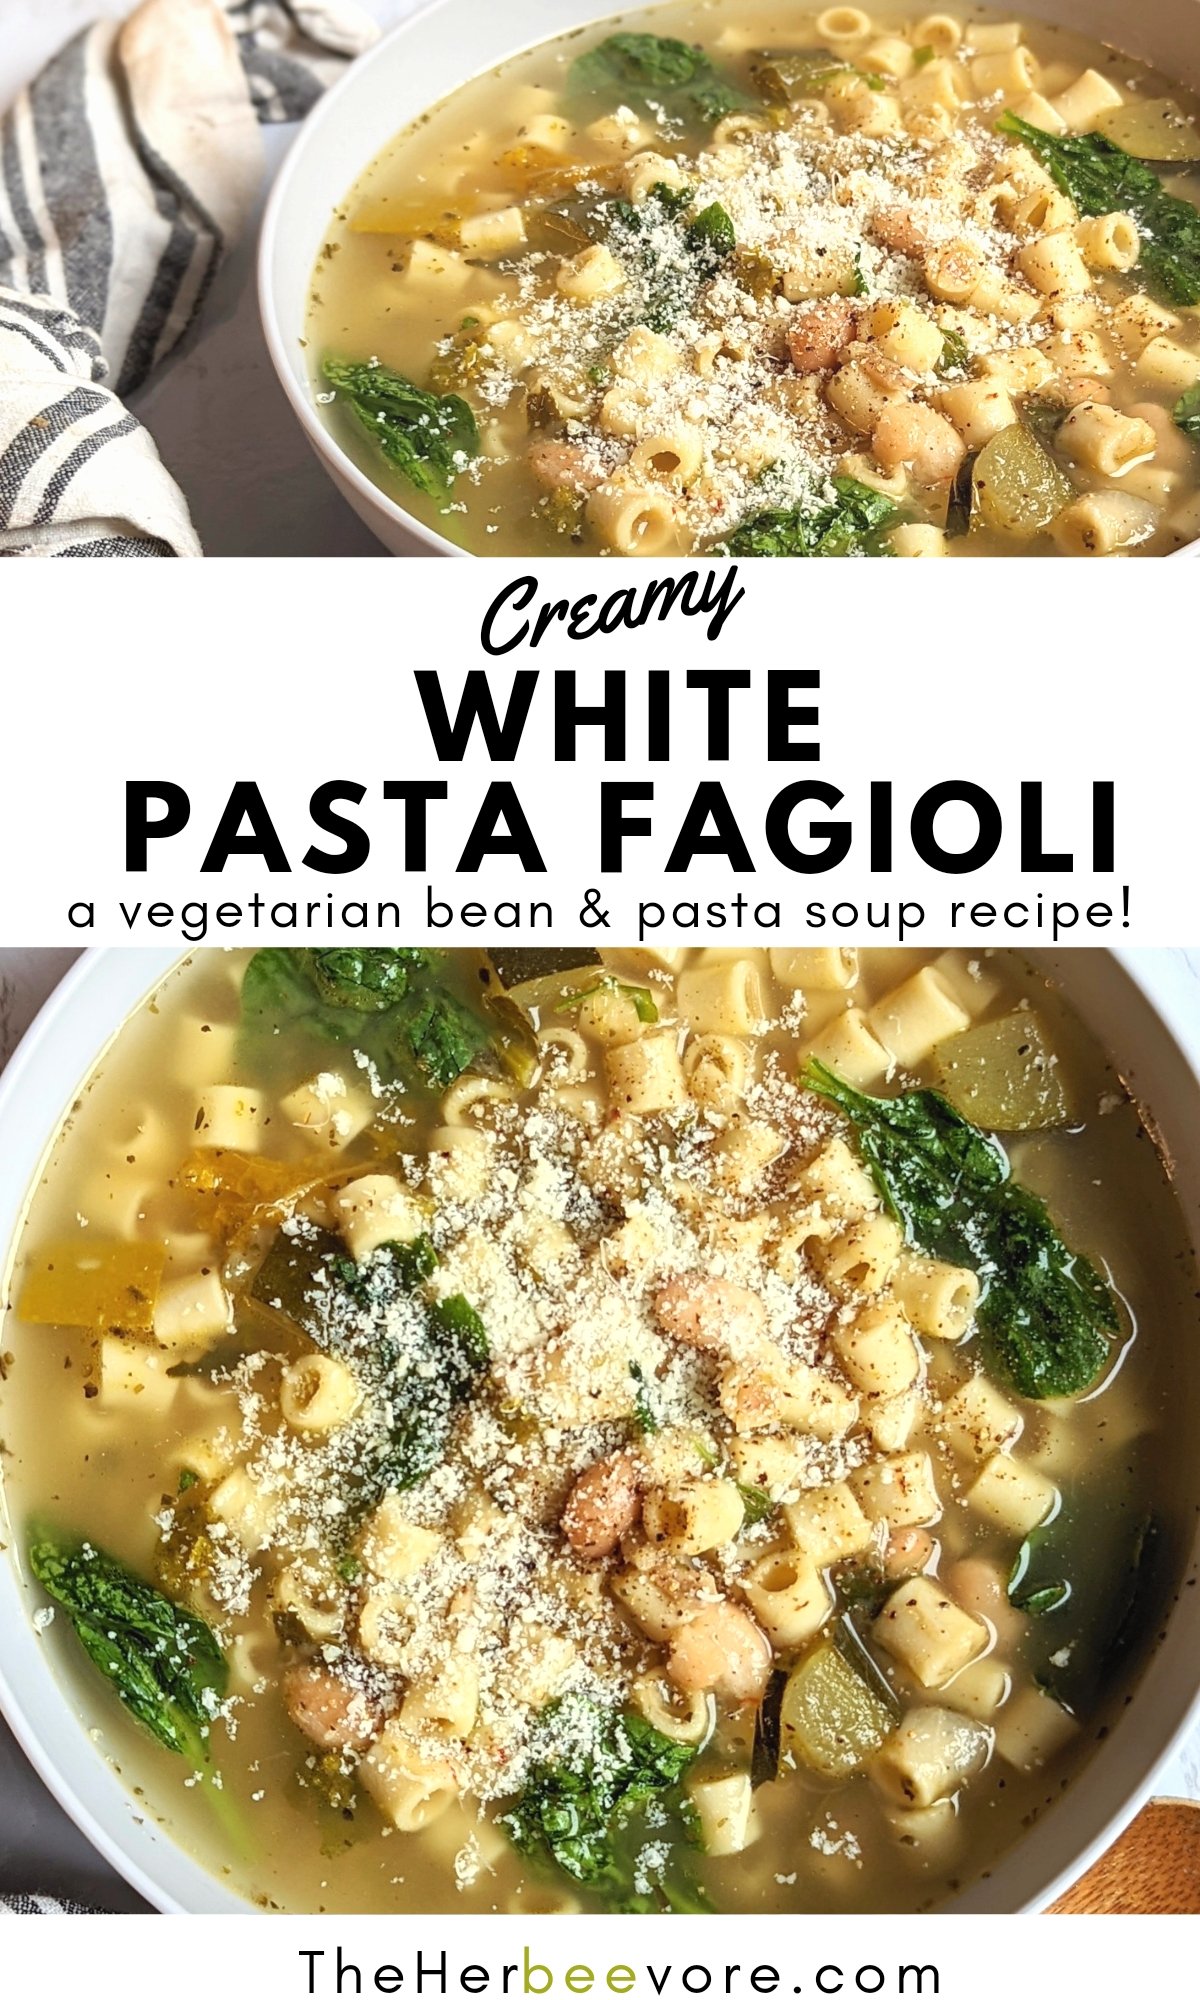 white pasta fagioli recipe with beans ditalini pasta spinach parmesan cheese celery and vegetable stock